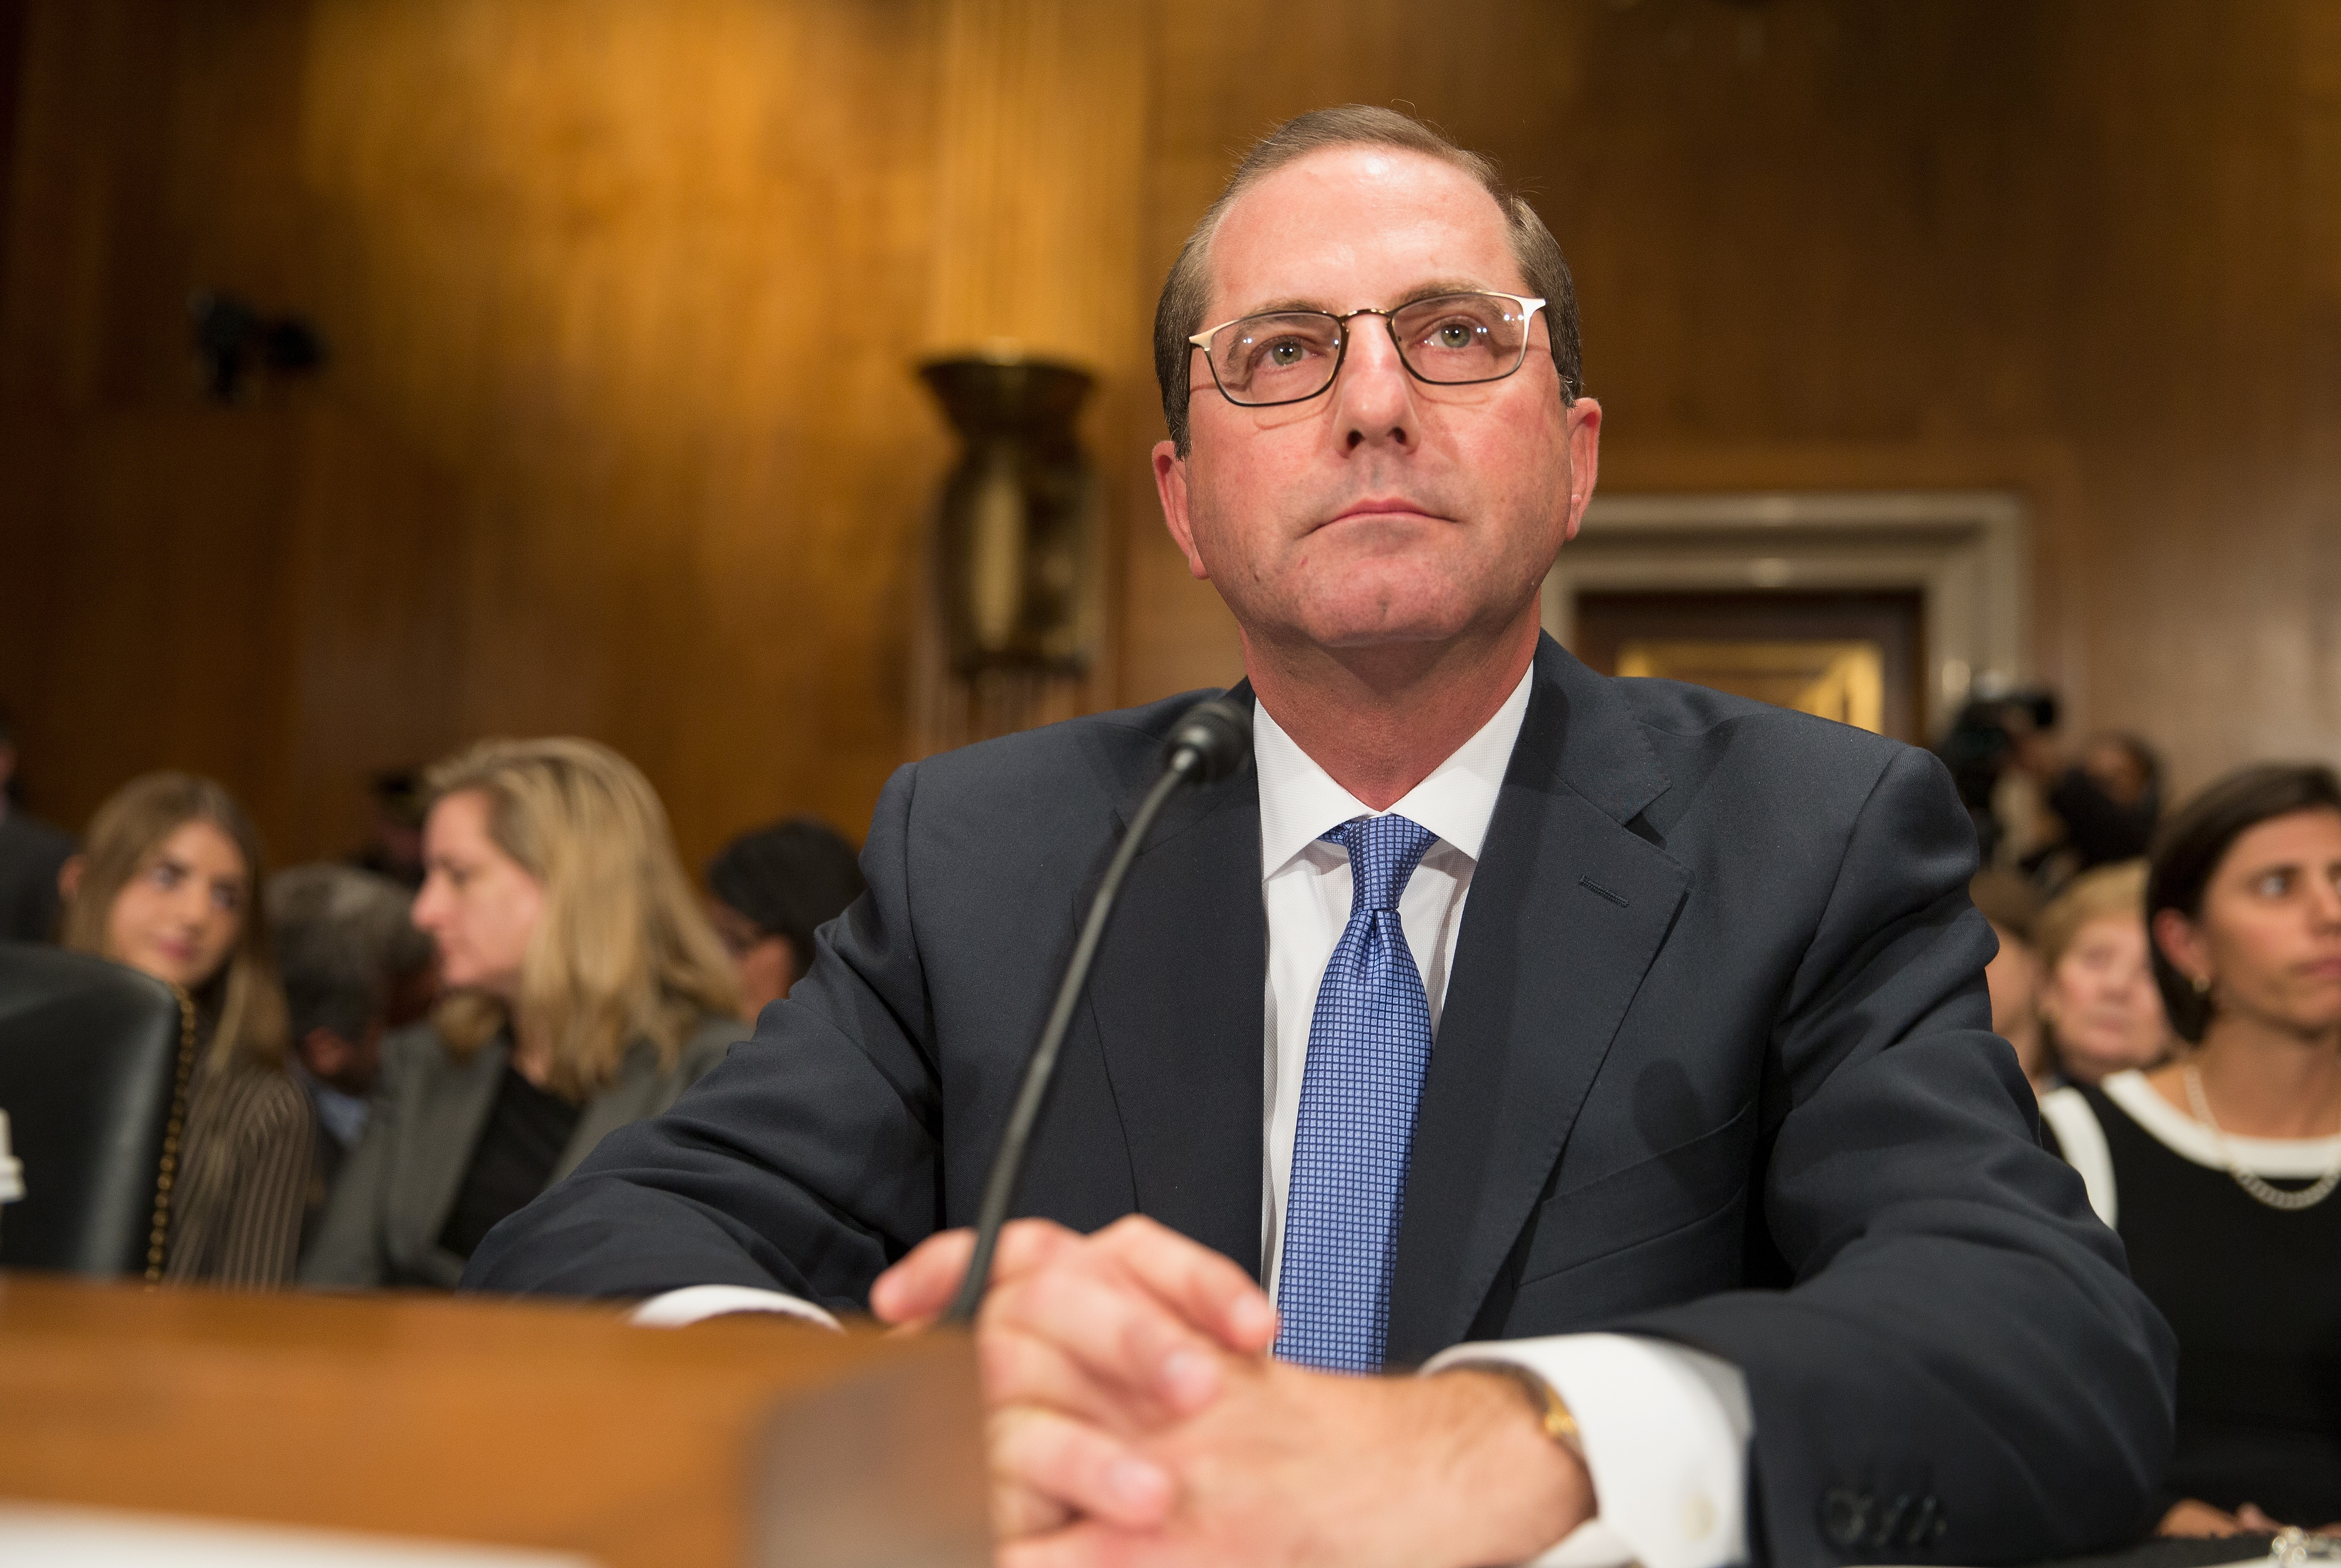 3 Things You Should Know About HHS Secretary Nominee Alex Azar